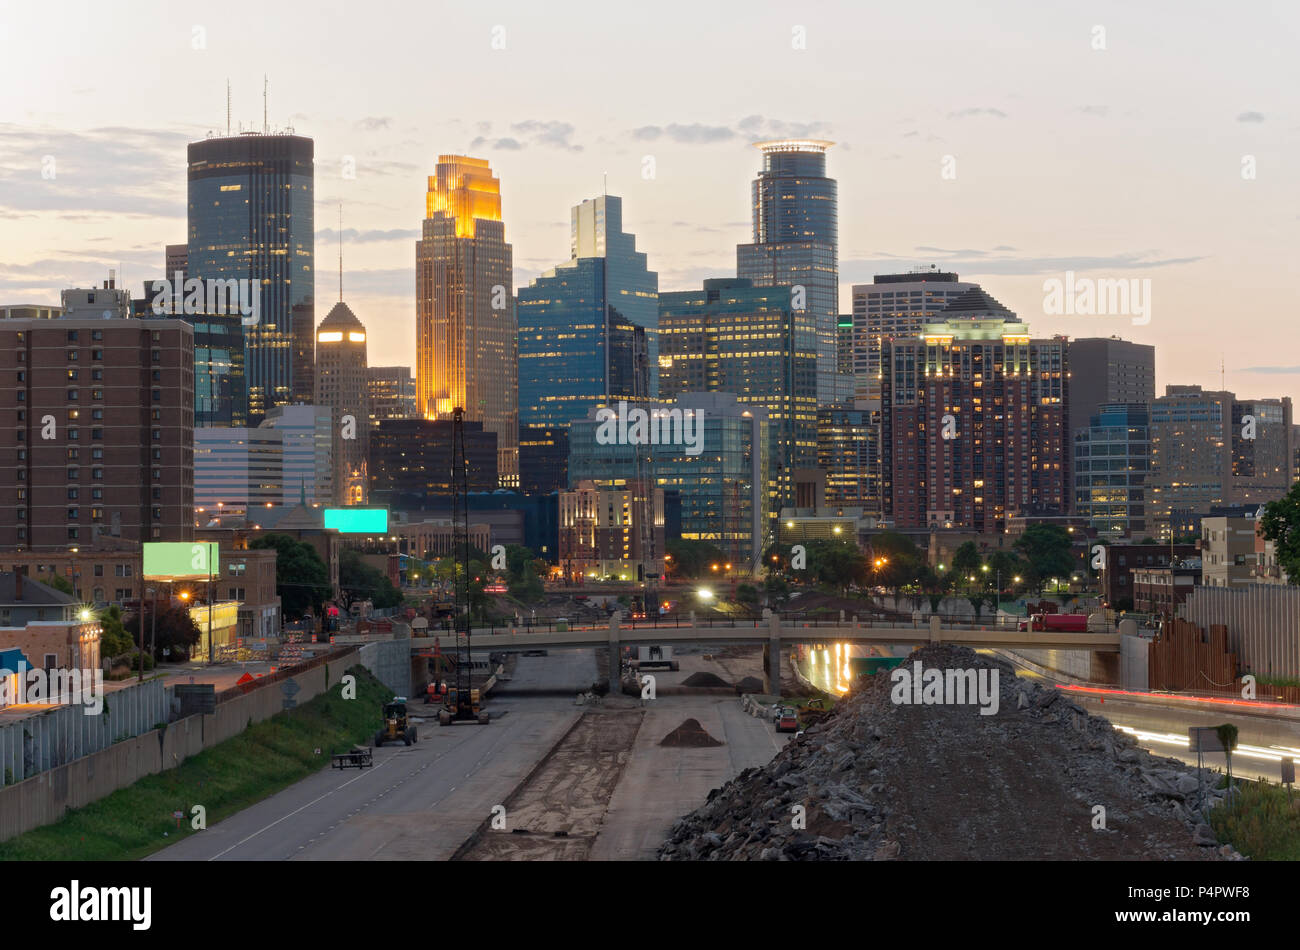 minneapolis skyline from 24th street pedestrian bridge overlooking 35w interstate into downtown showing reconstruction of interstate and office towers Stock Photo